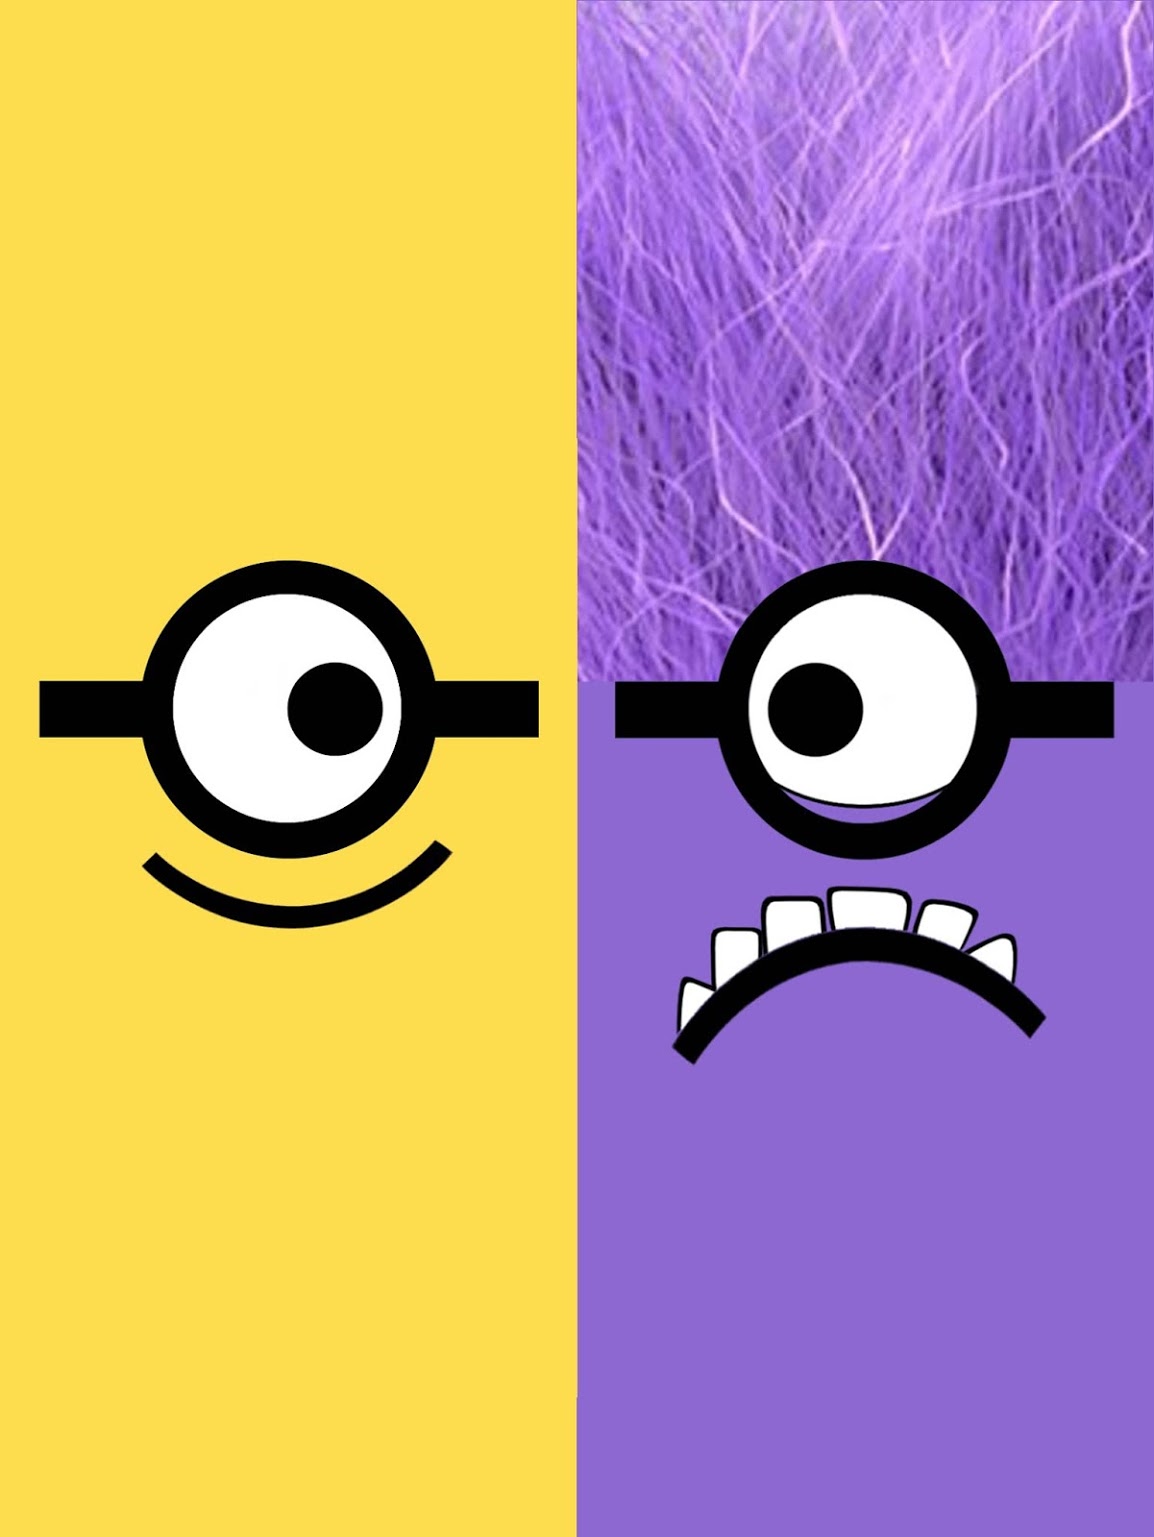 Wallpaper Dos Minions Para Windows Phone Android E iPhone Popxd